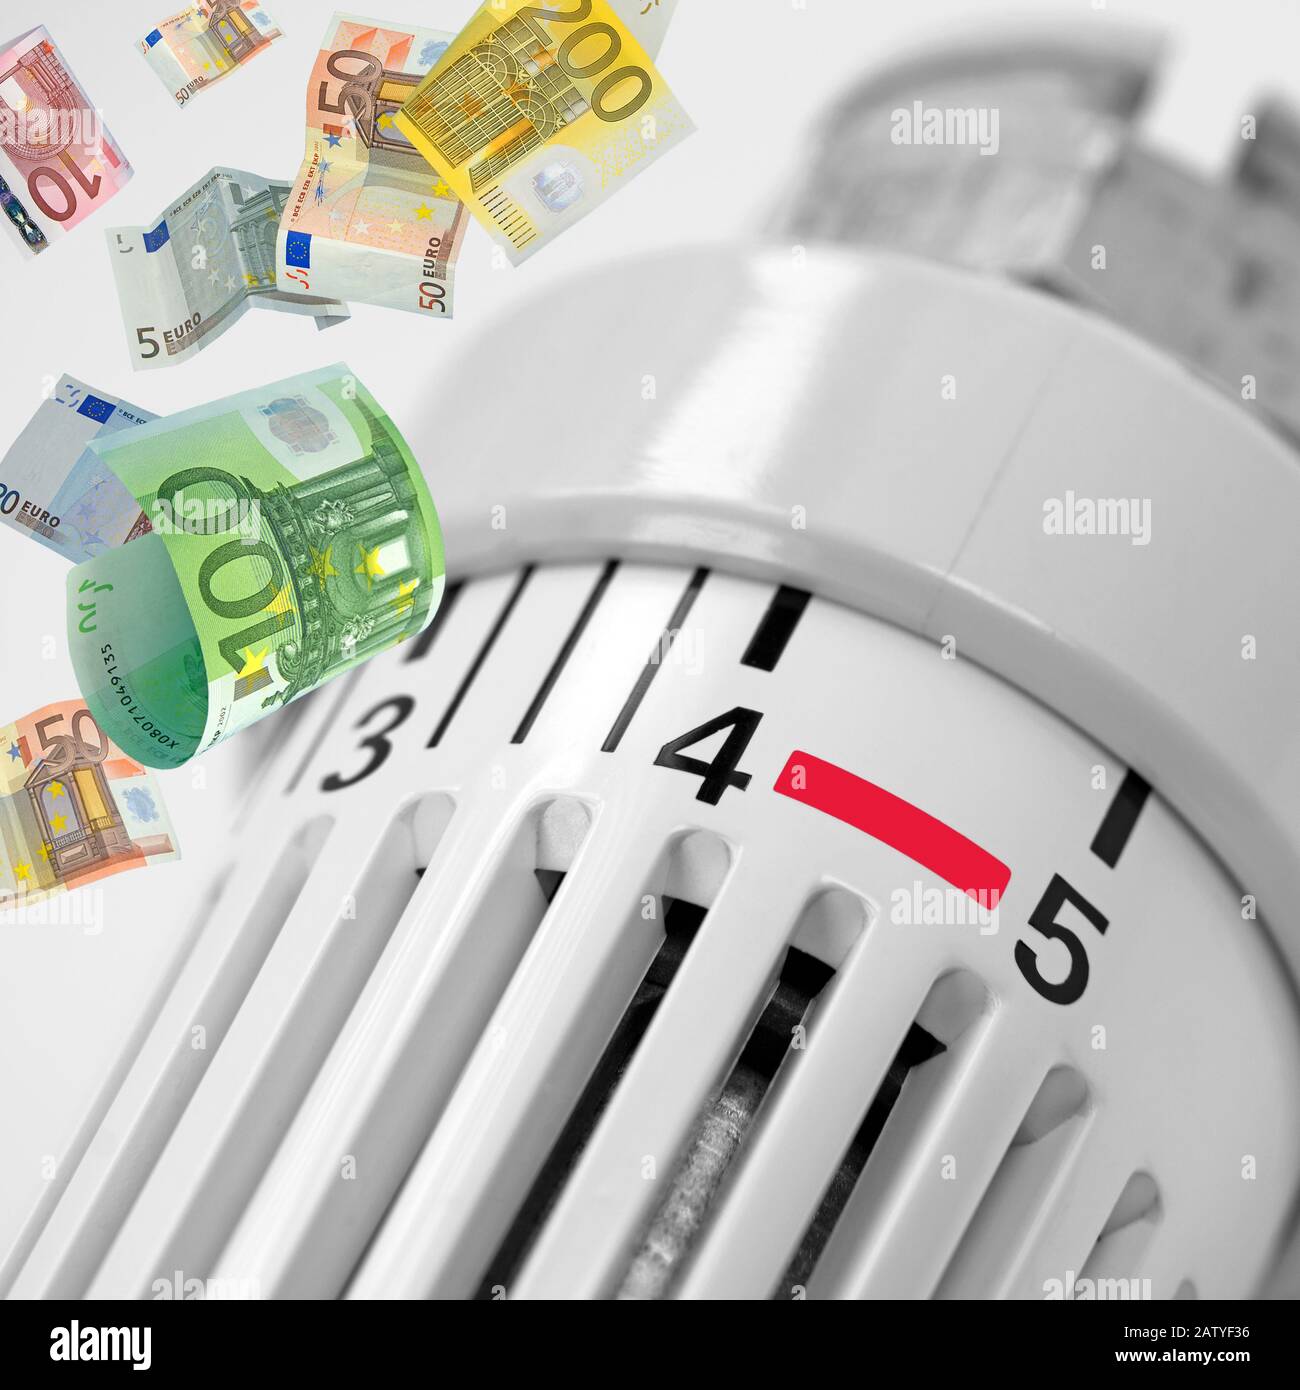 Thermostat for heaters and banknotes in a collage Stock Photo